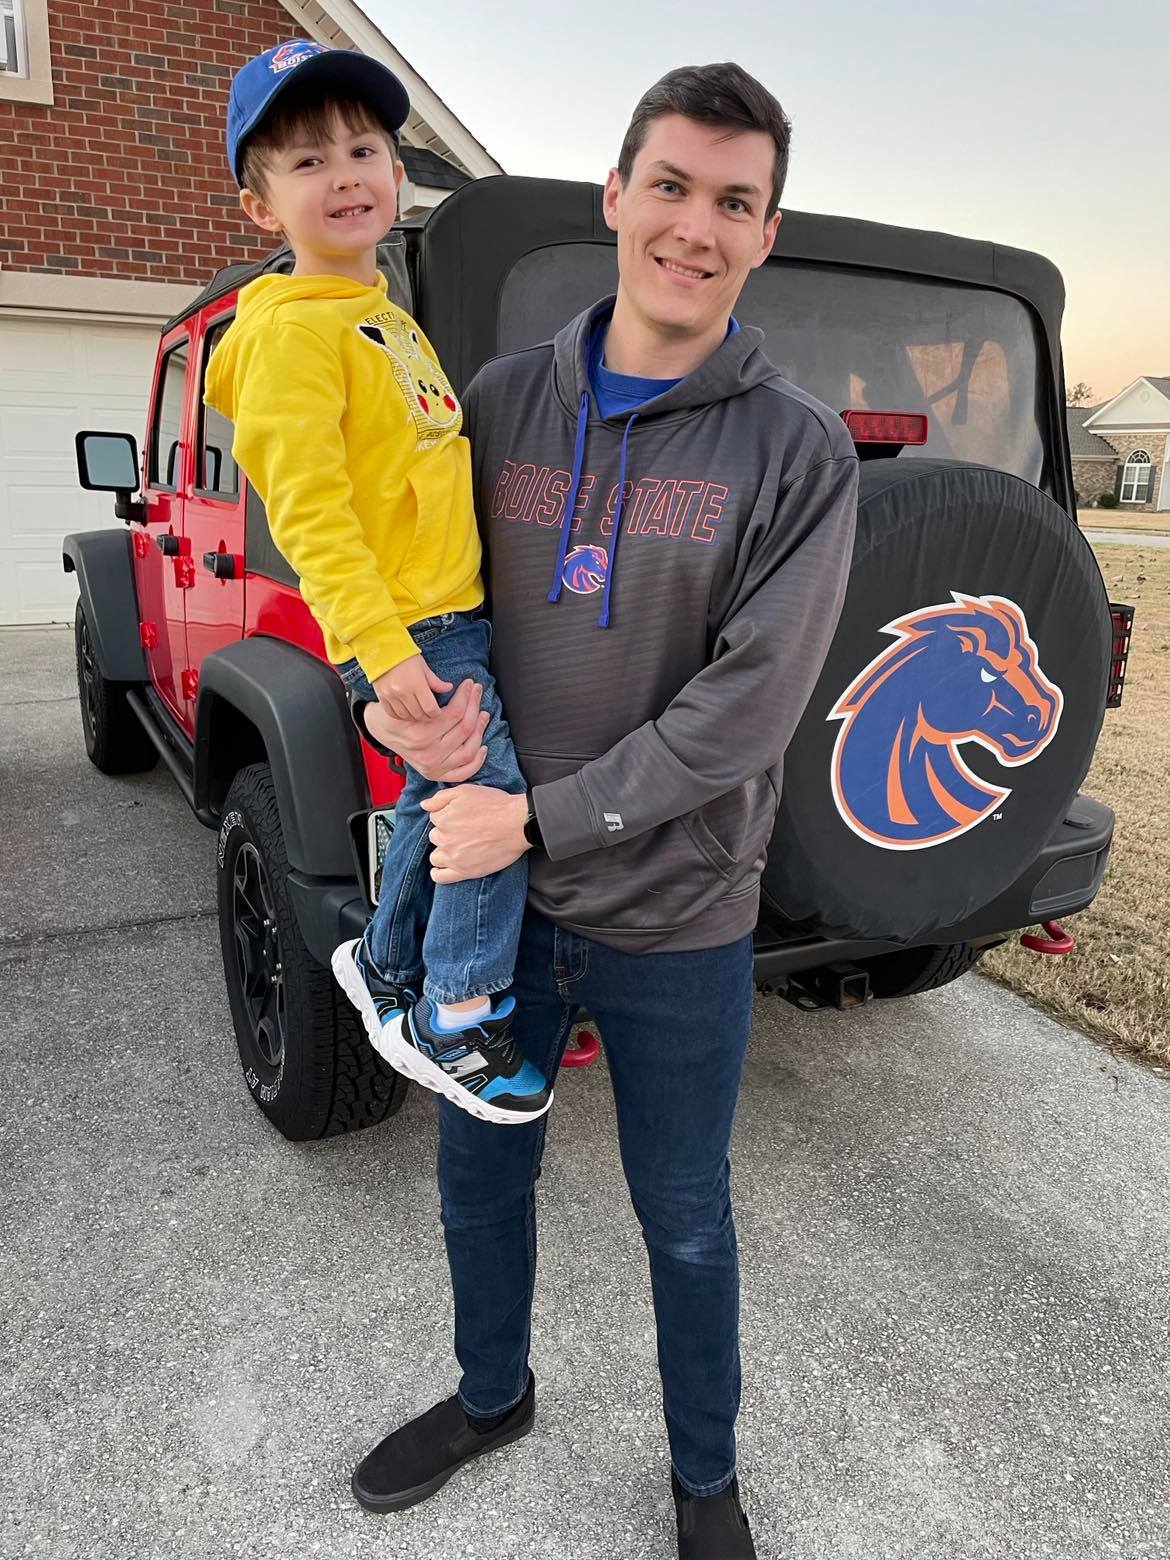 Austin Richardson poses with son in front of a house.